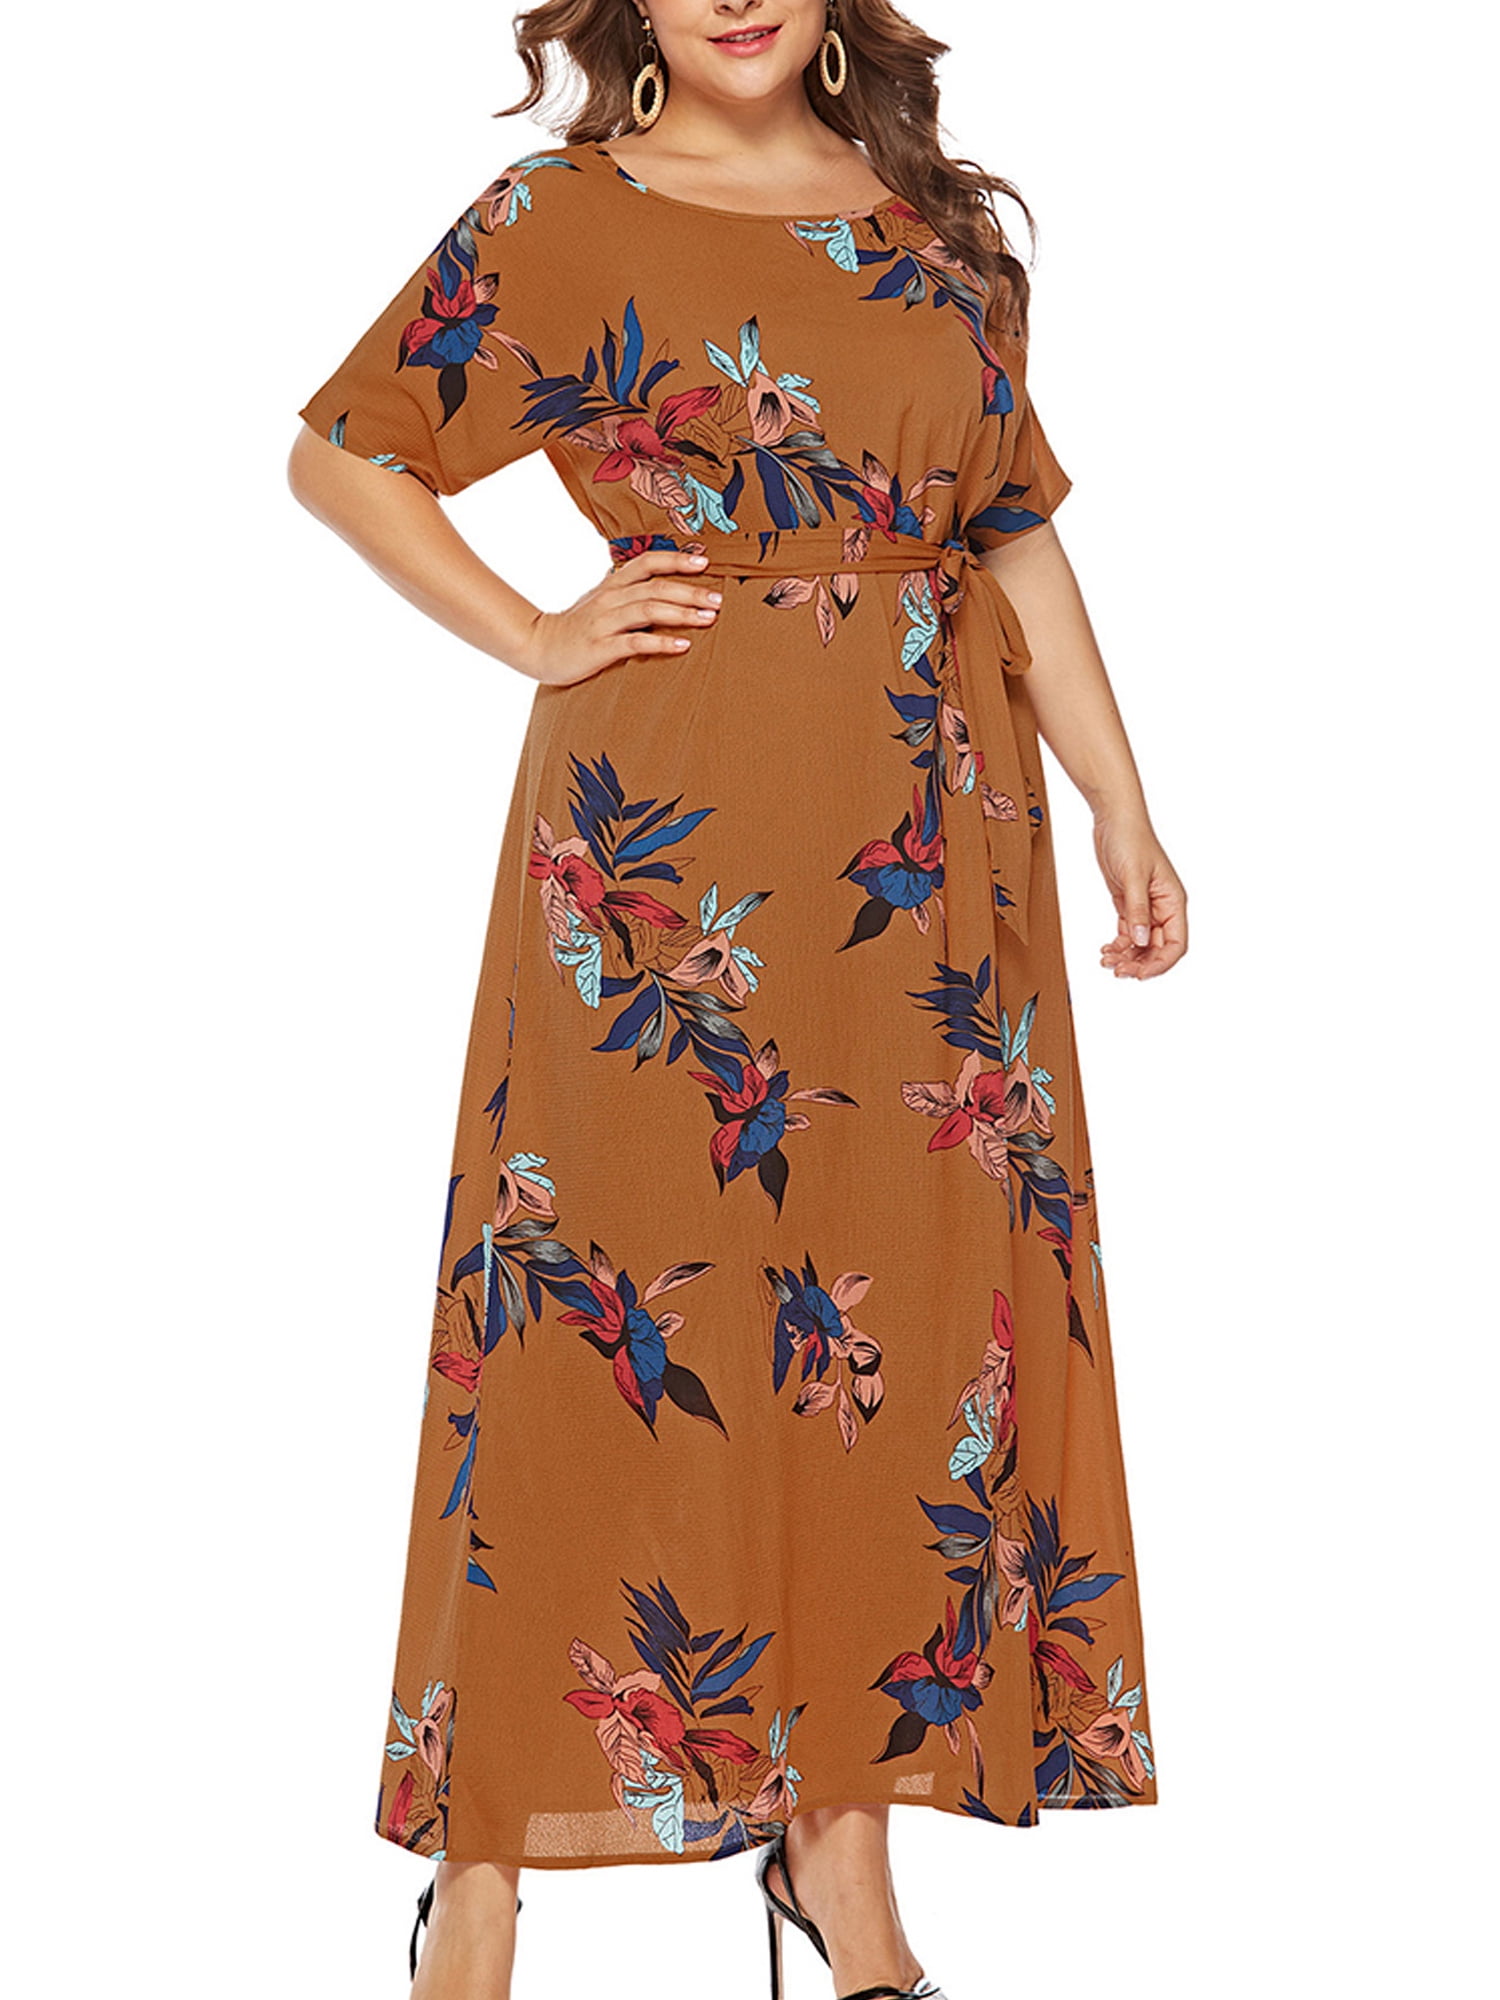 Women's Plus Size Boho Floral Holiday ...